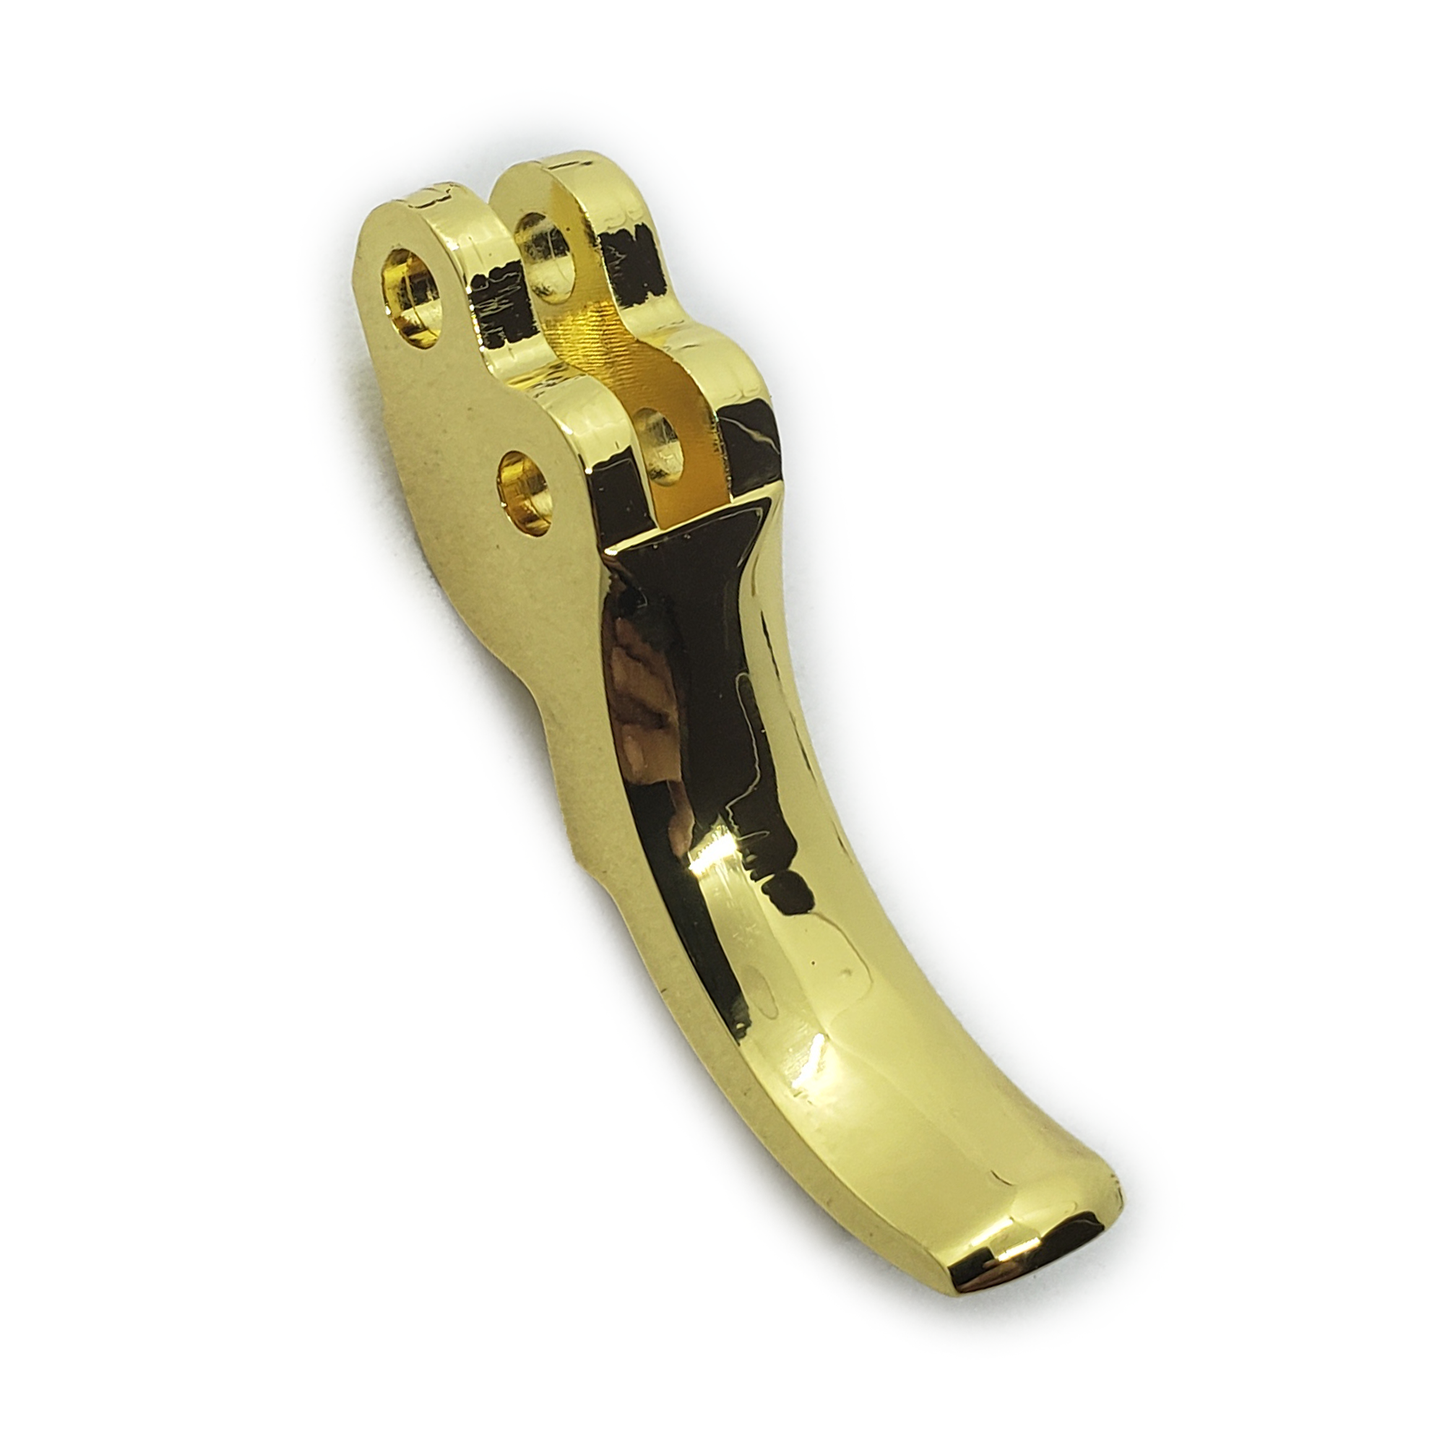 Trigger for Taurus PT 92, 99, and 100 series full frame Gold or Nickel Plated Trigger